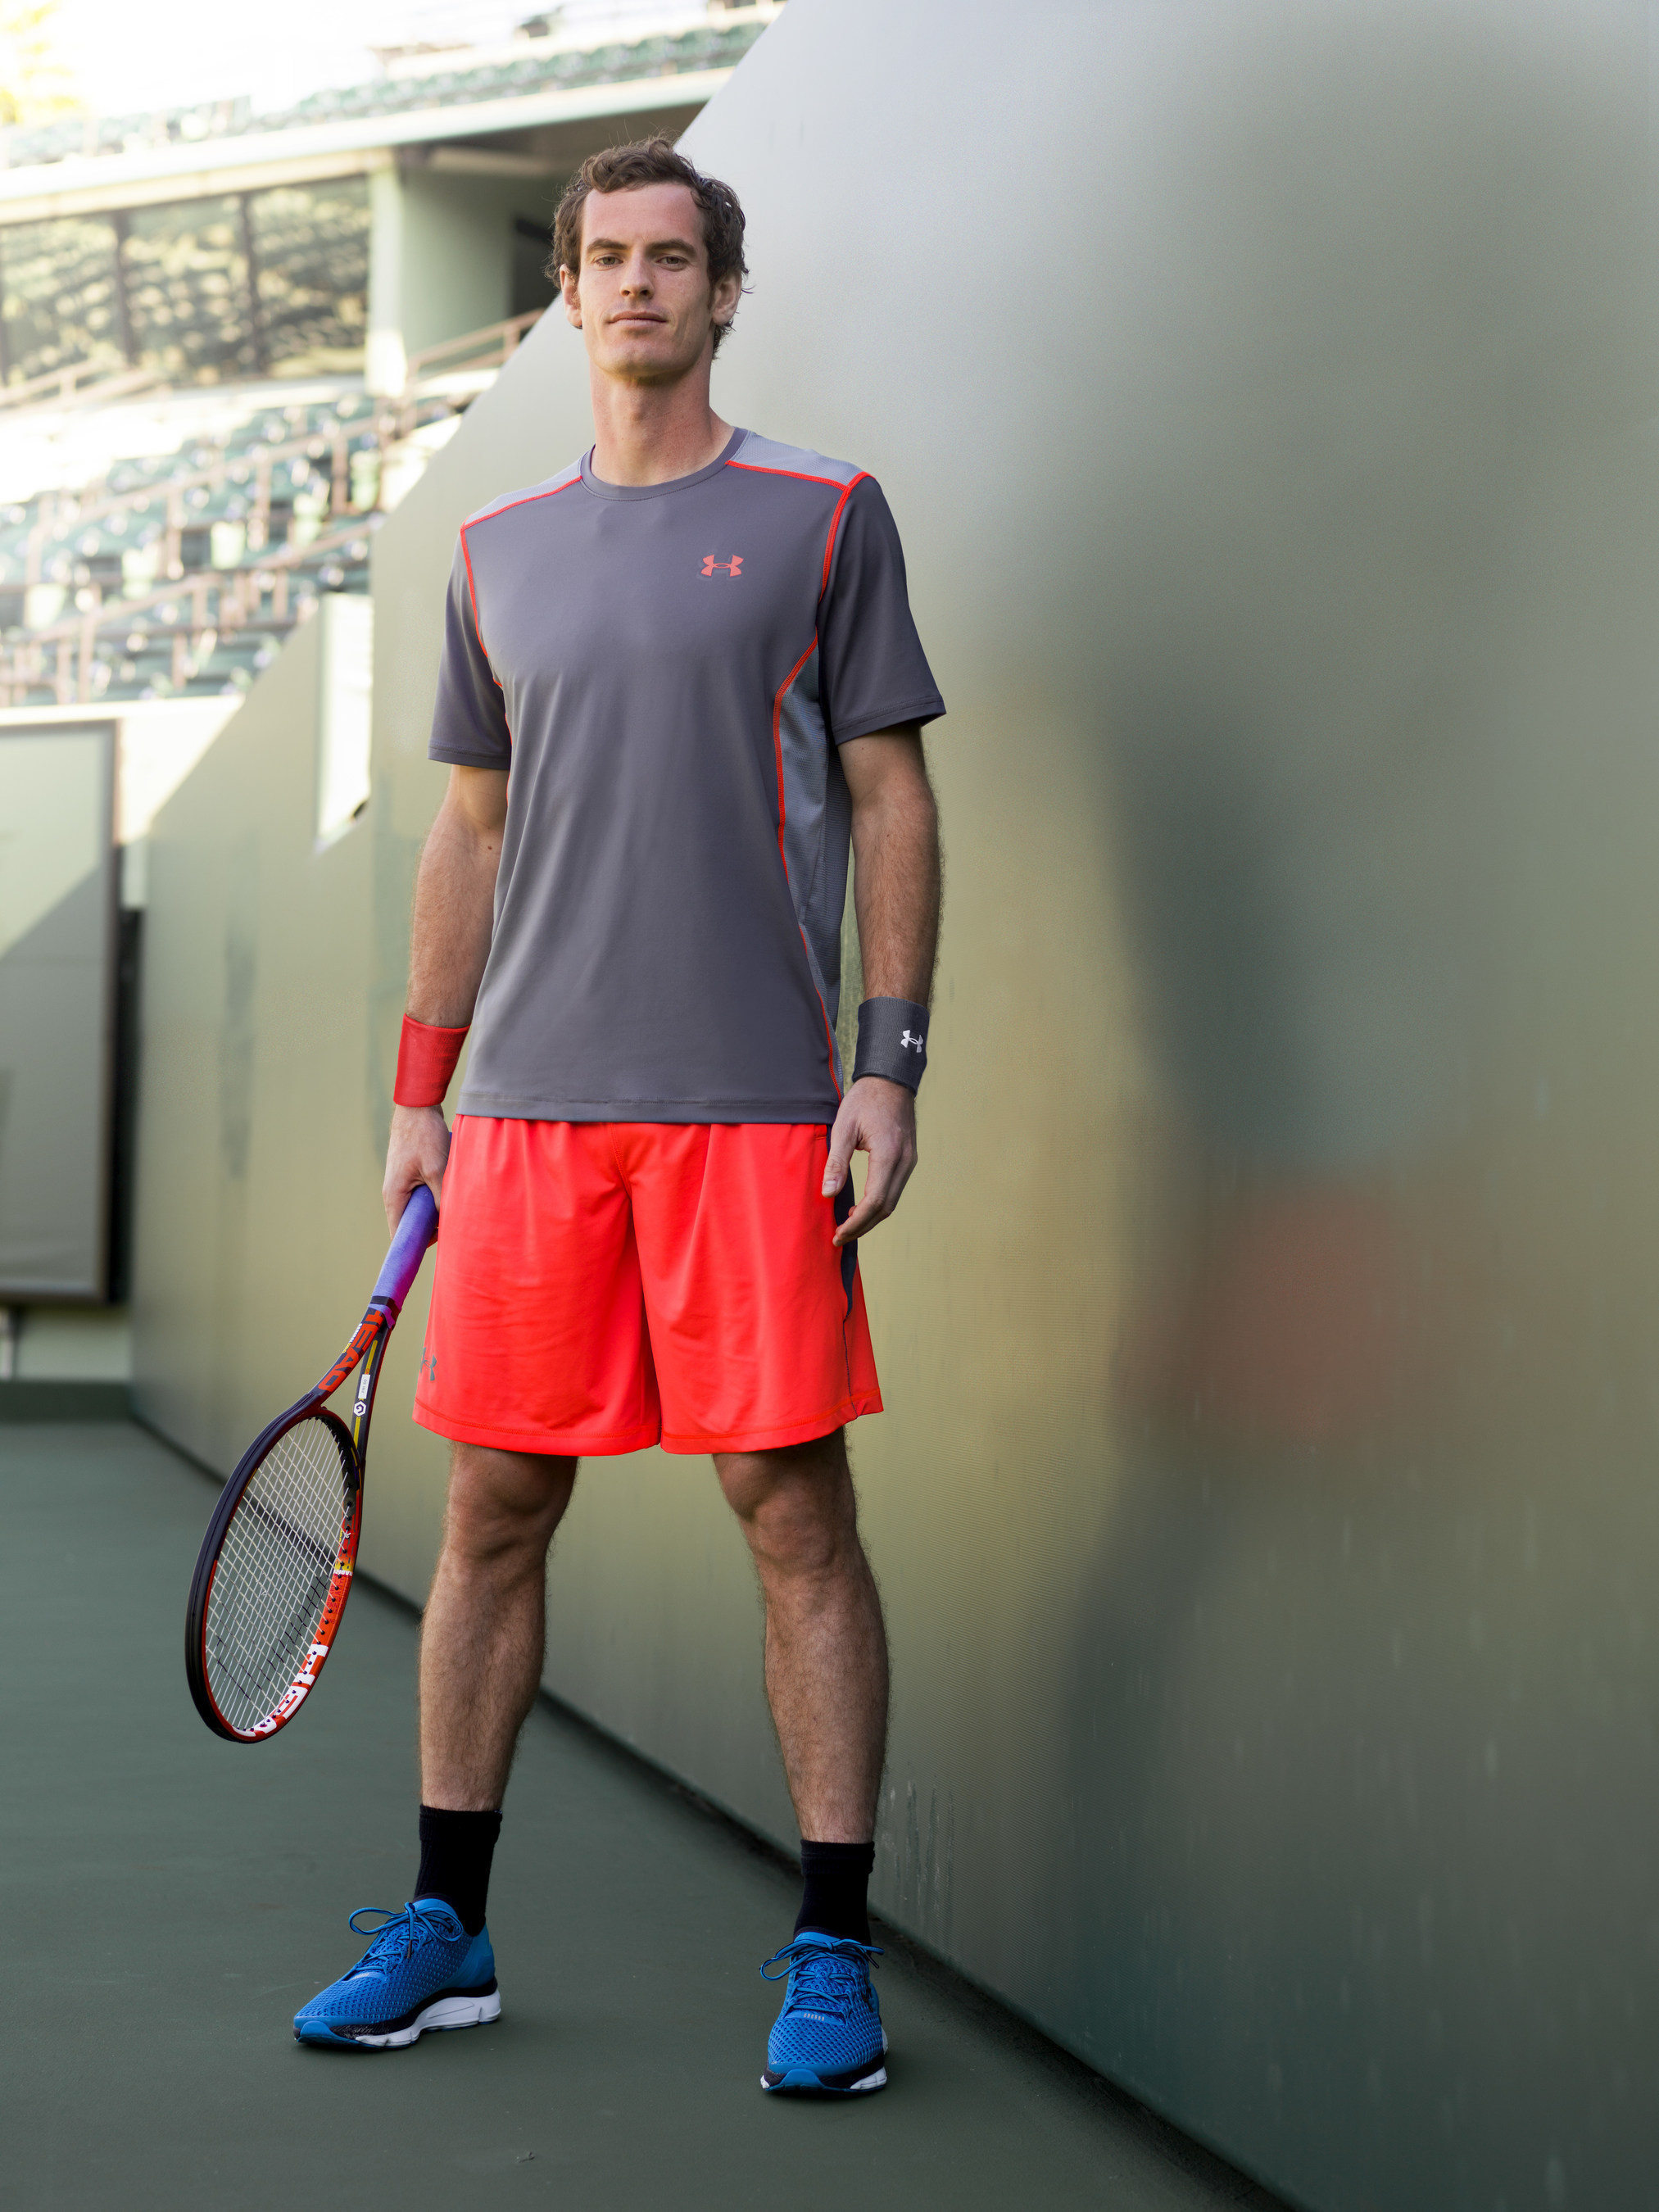 Professional Tennis Player Andy Murray